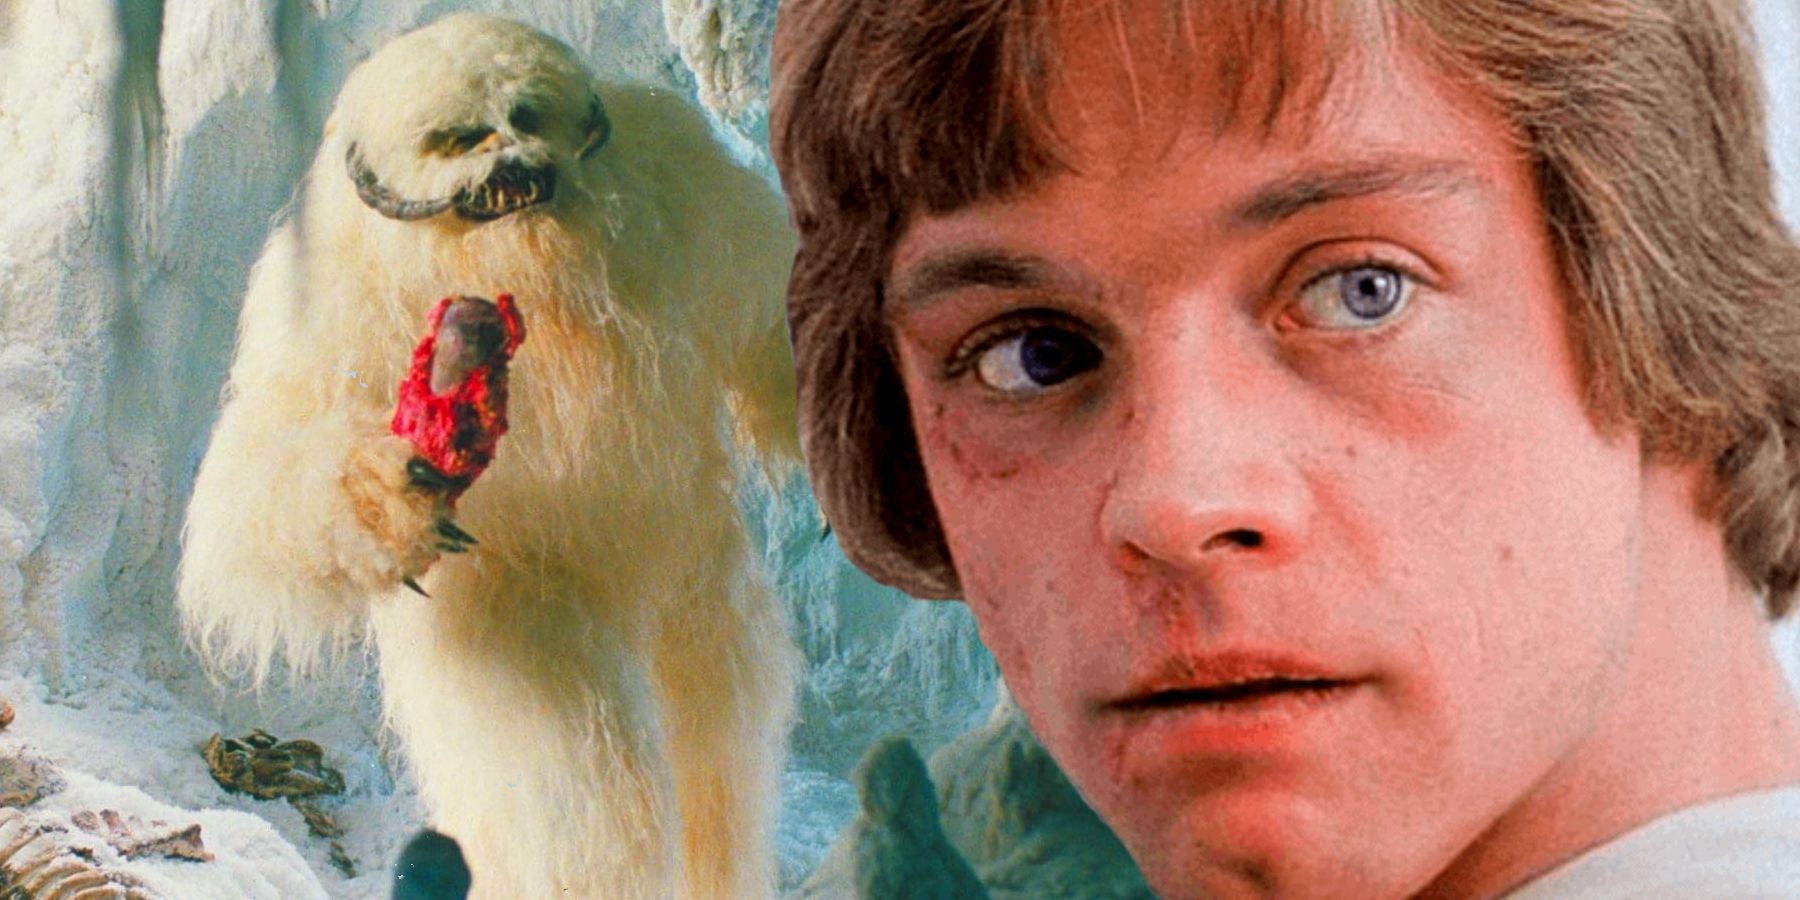 Custom image of a Wampa and Mark Hamill's injured face in Star Wars: The Empire Strikes Back